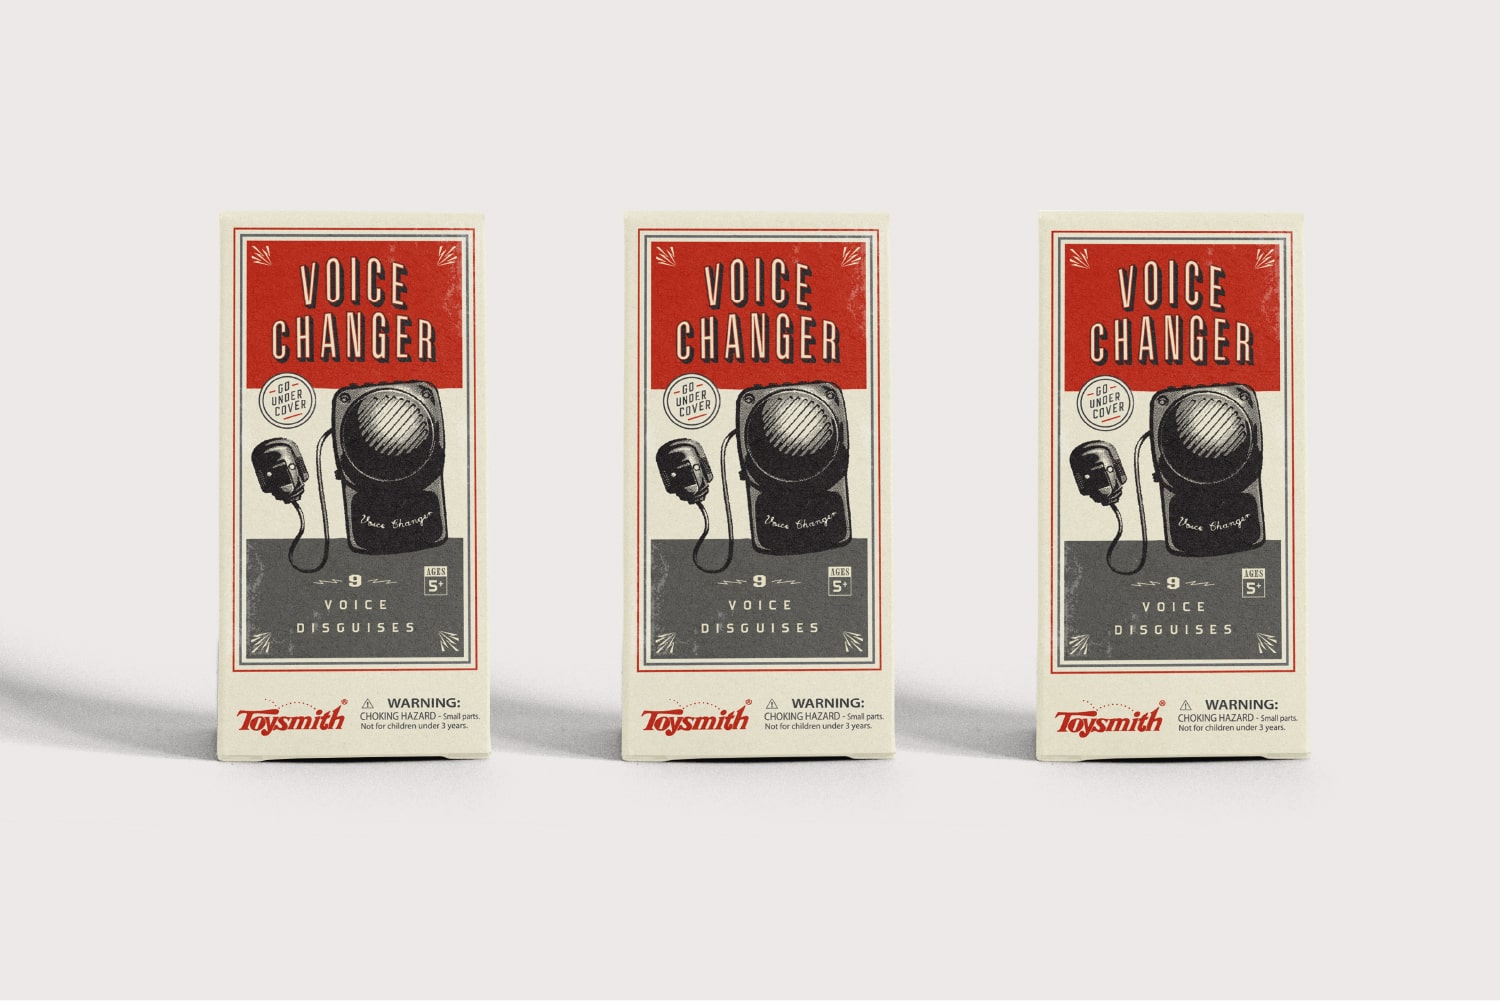 Voice Changer packaging